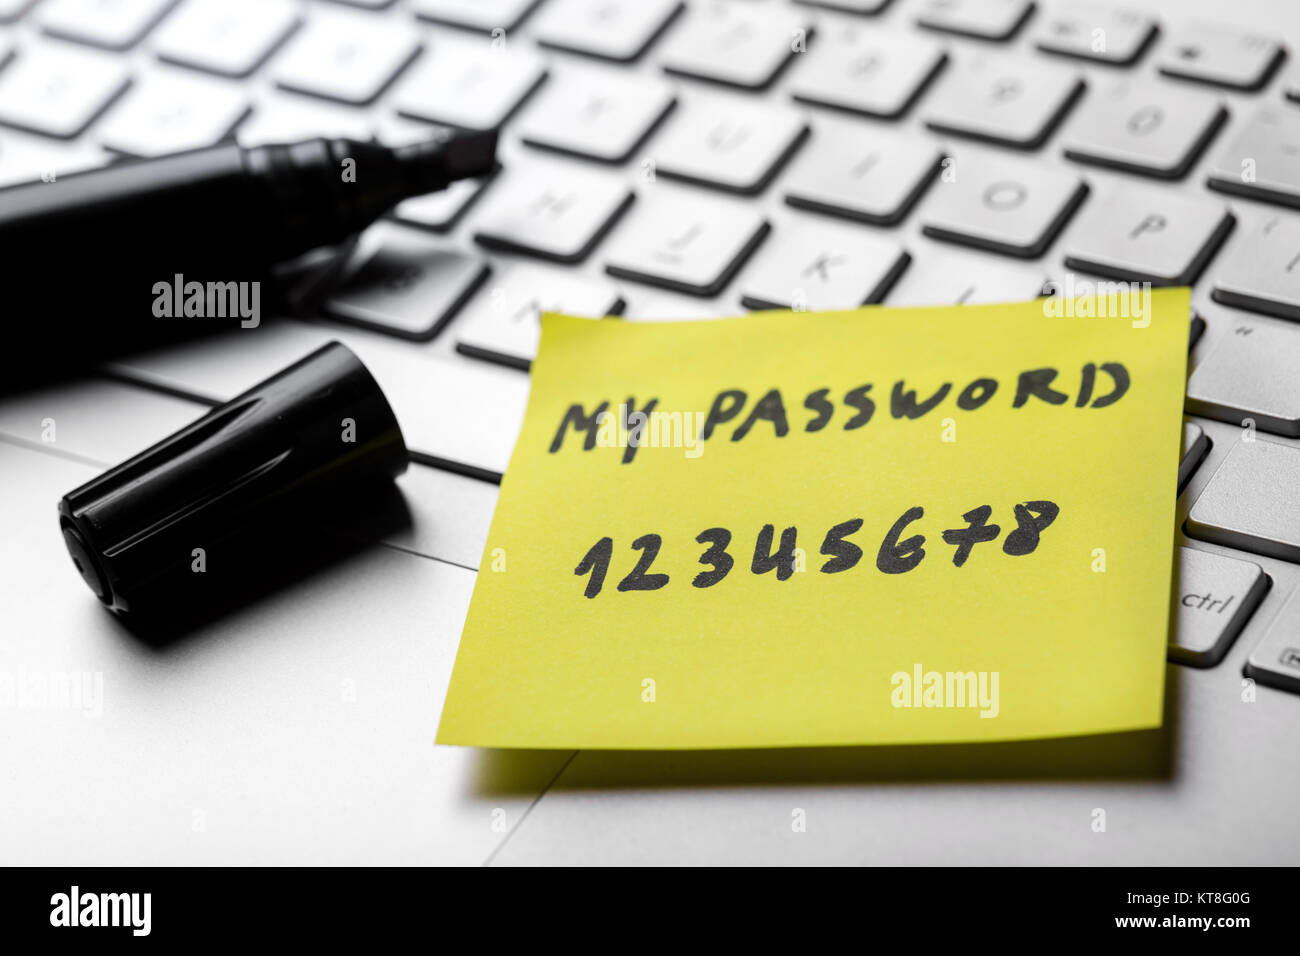 sticky note with weak easy password on laptop keyboard Stock Photo